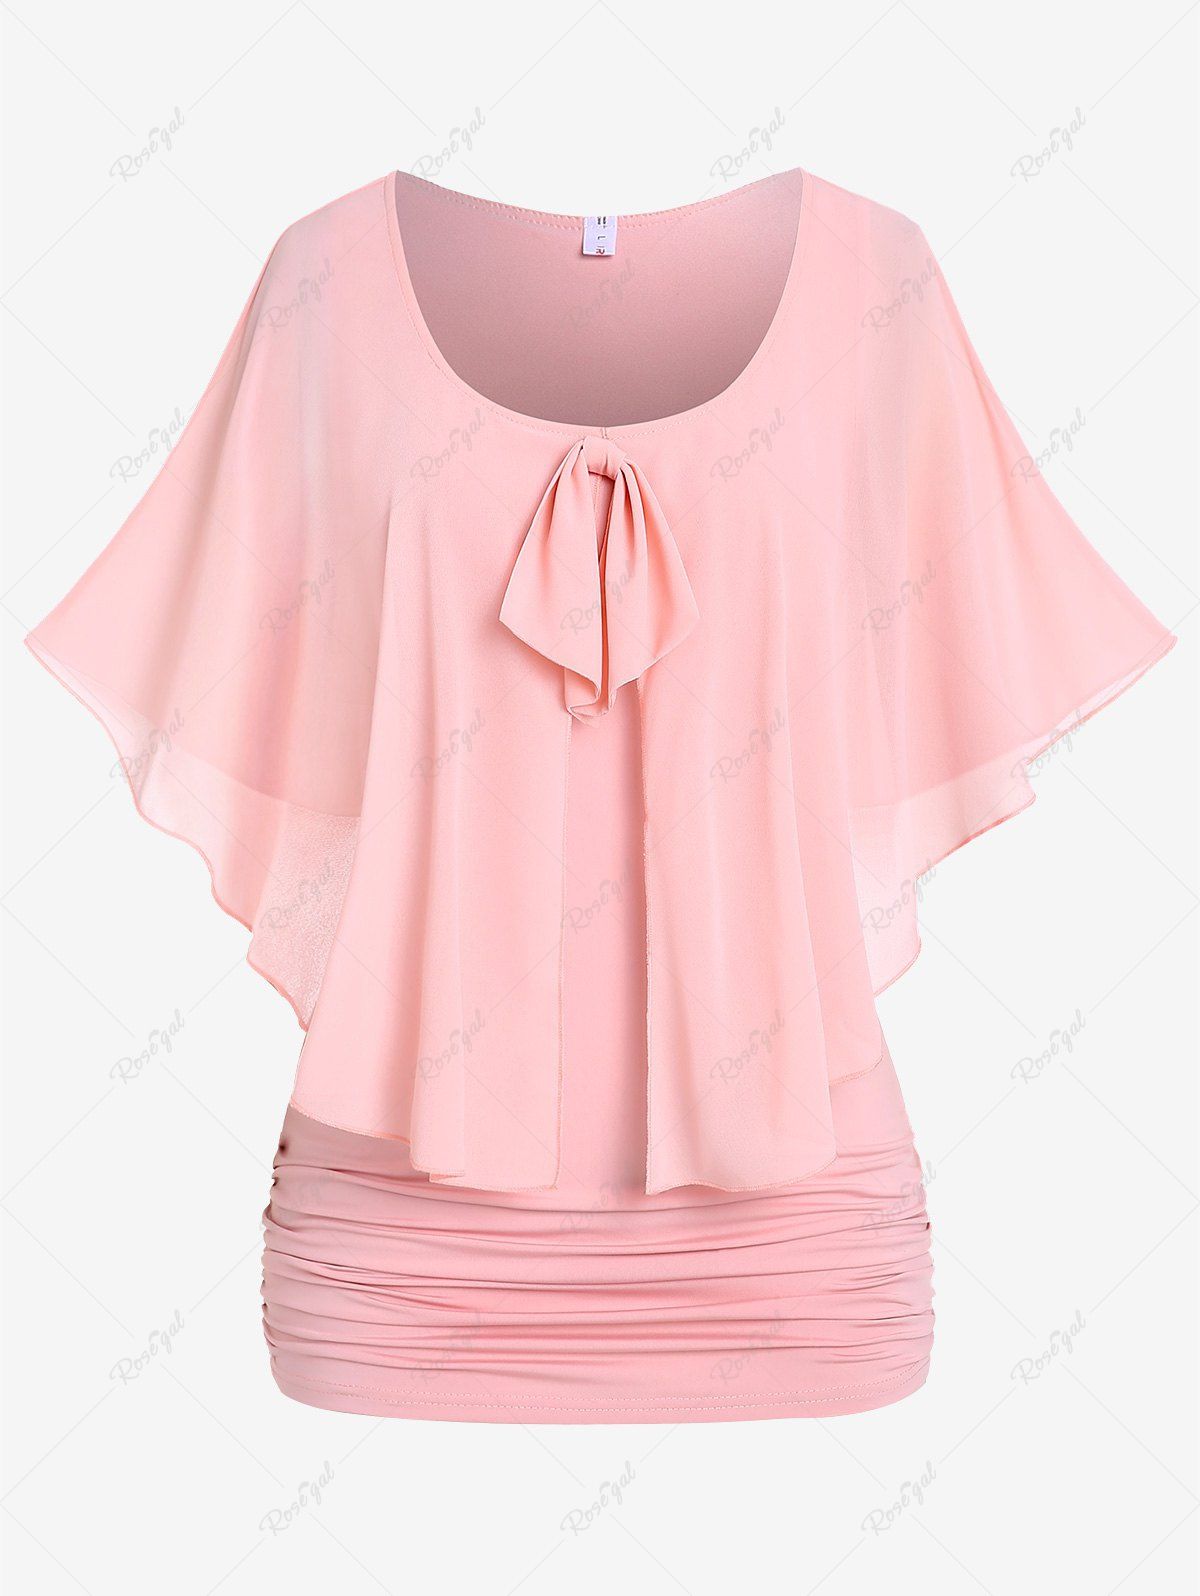 Chic Plus Size Mesh Overlay Bowknot Capelet T-shirt  